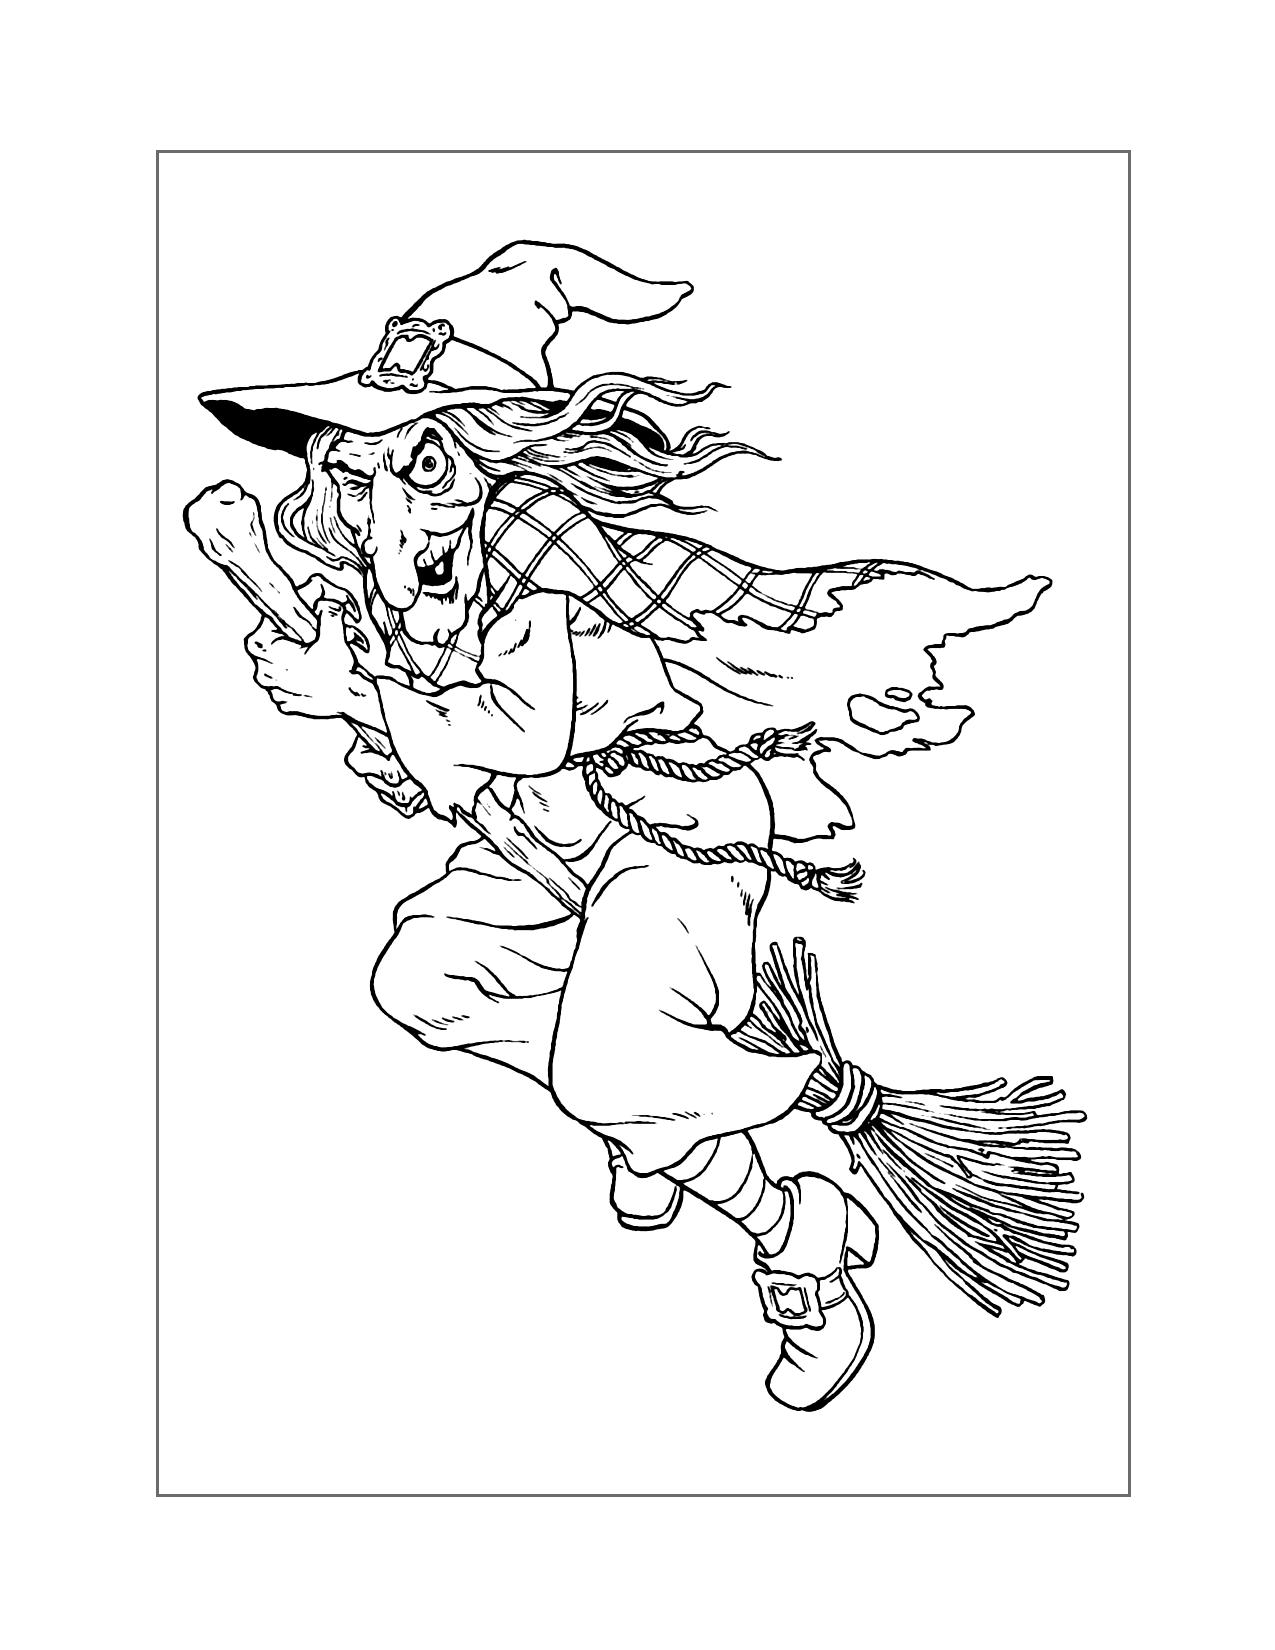 Crazy Creepy Halloween Witch Coloring Page